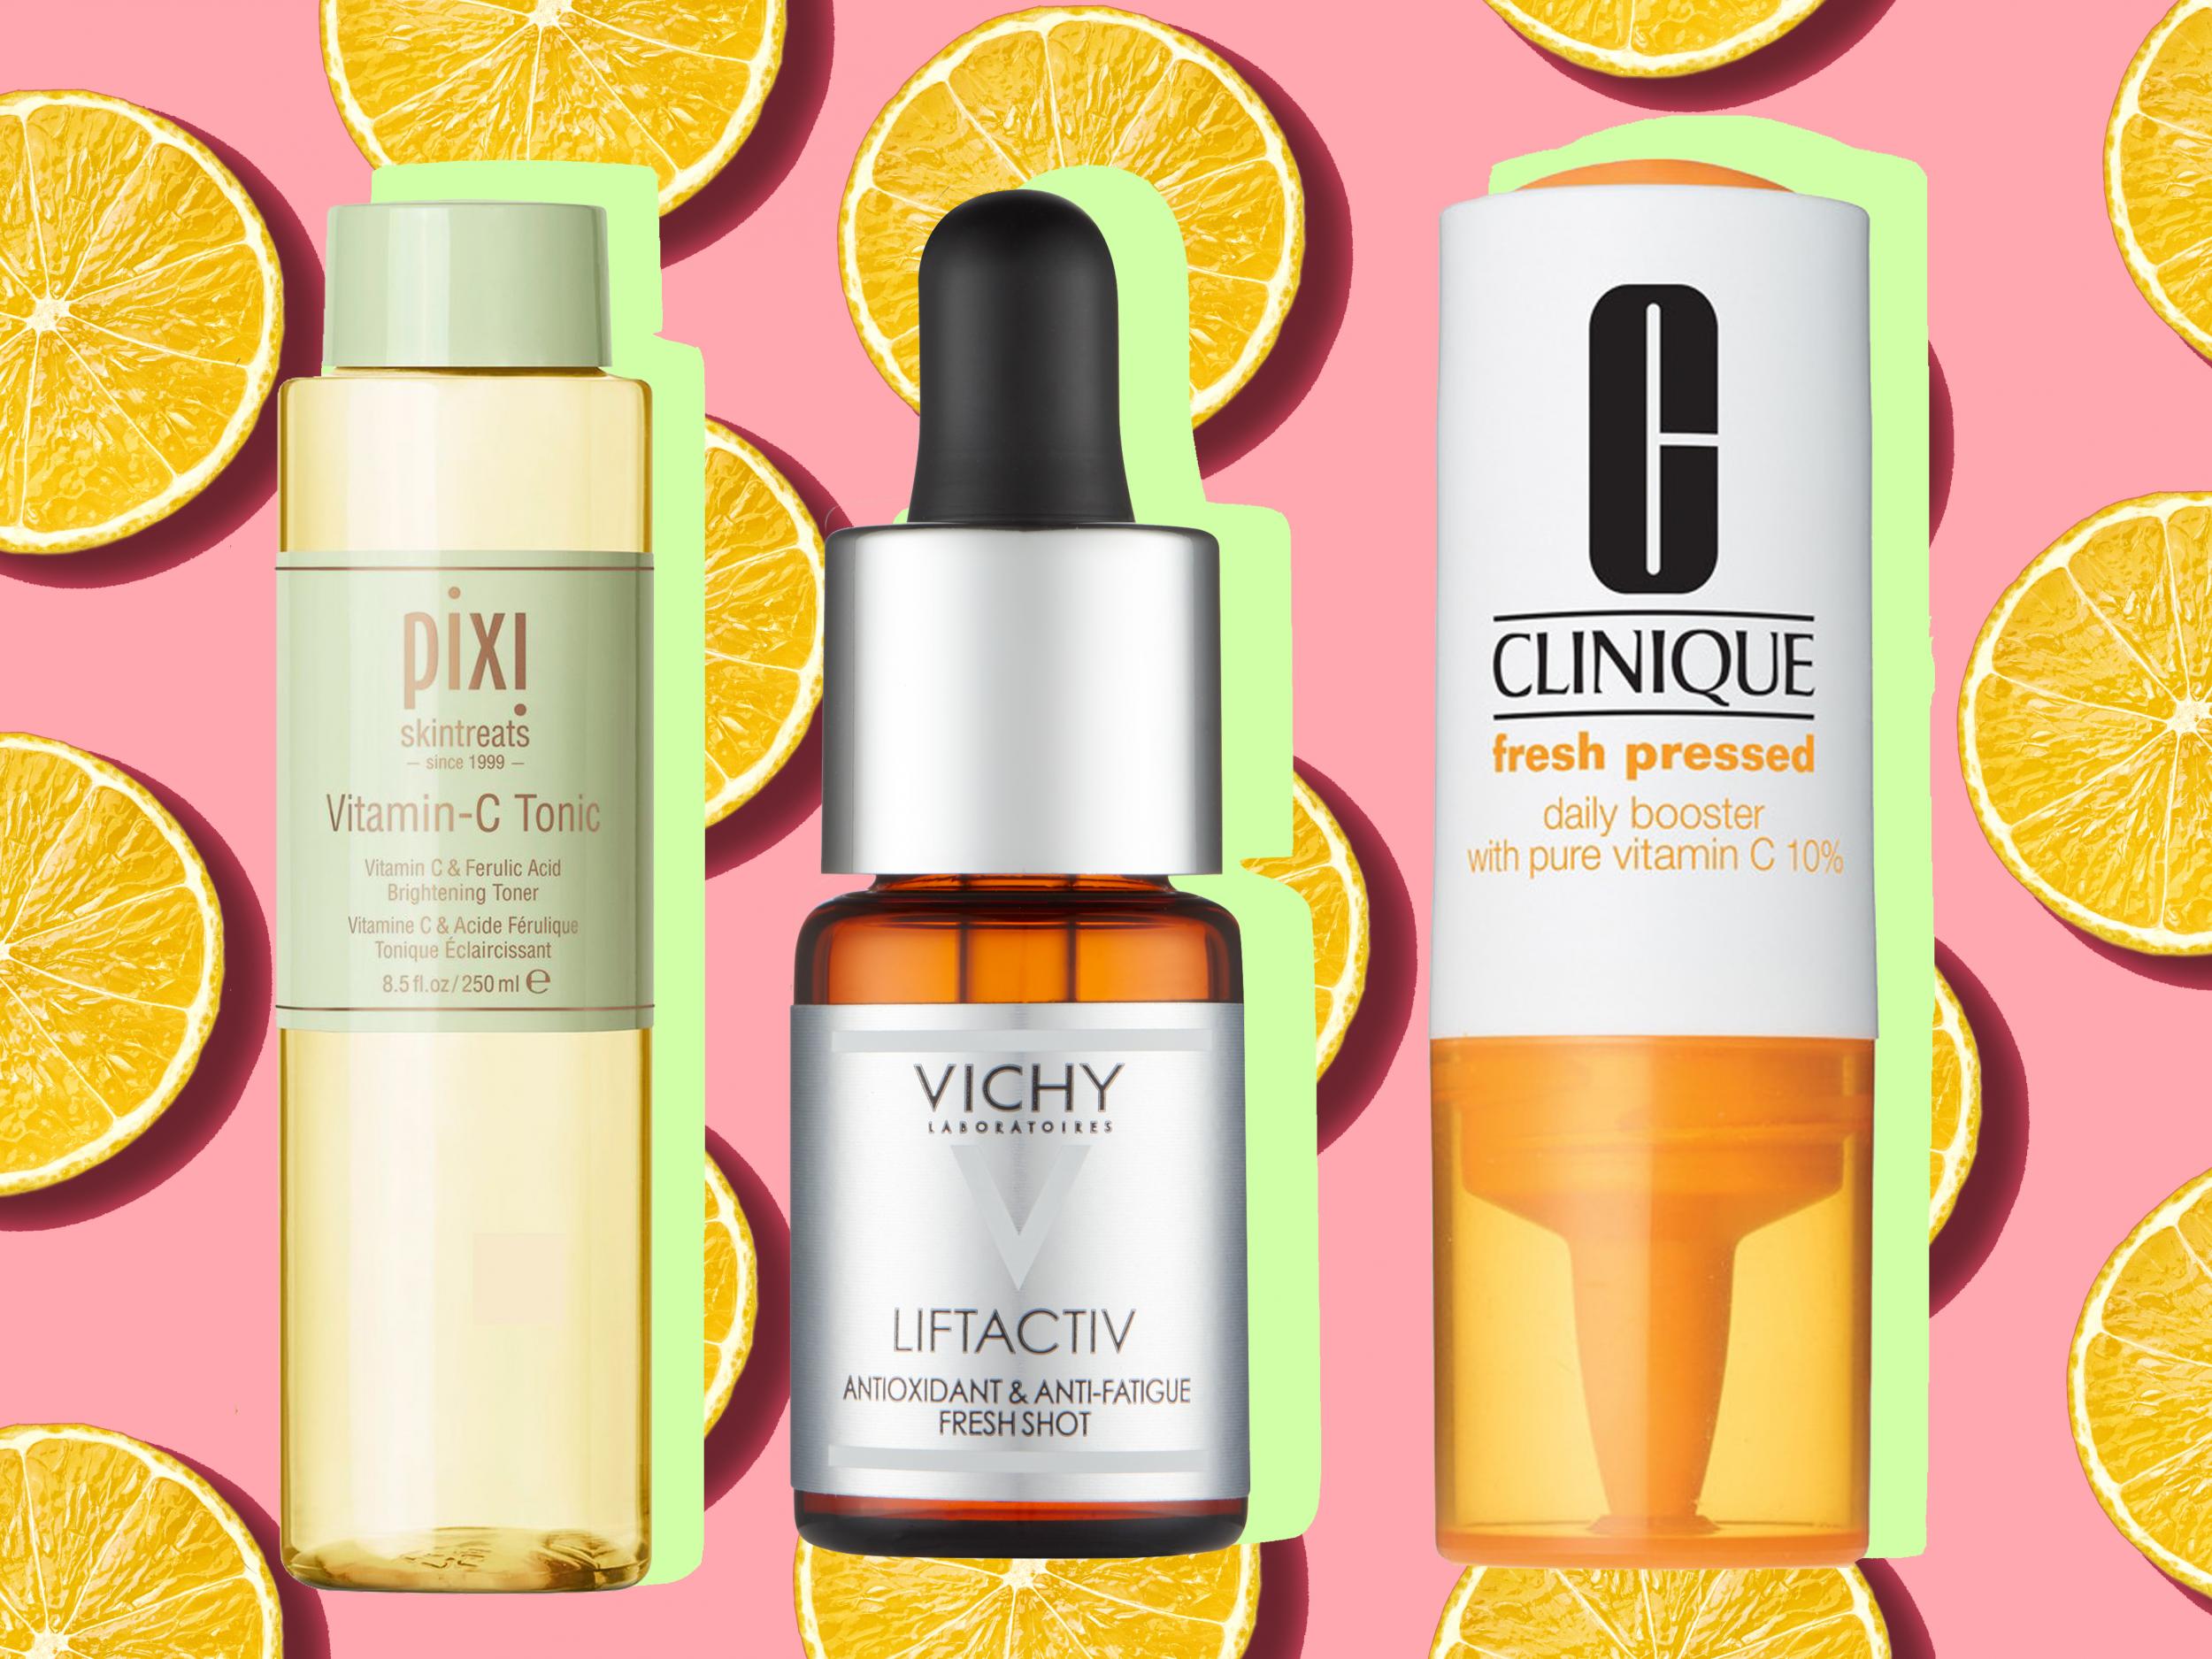 12 best vitamin c skincare products | The Independent